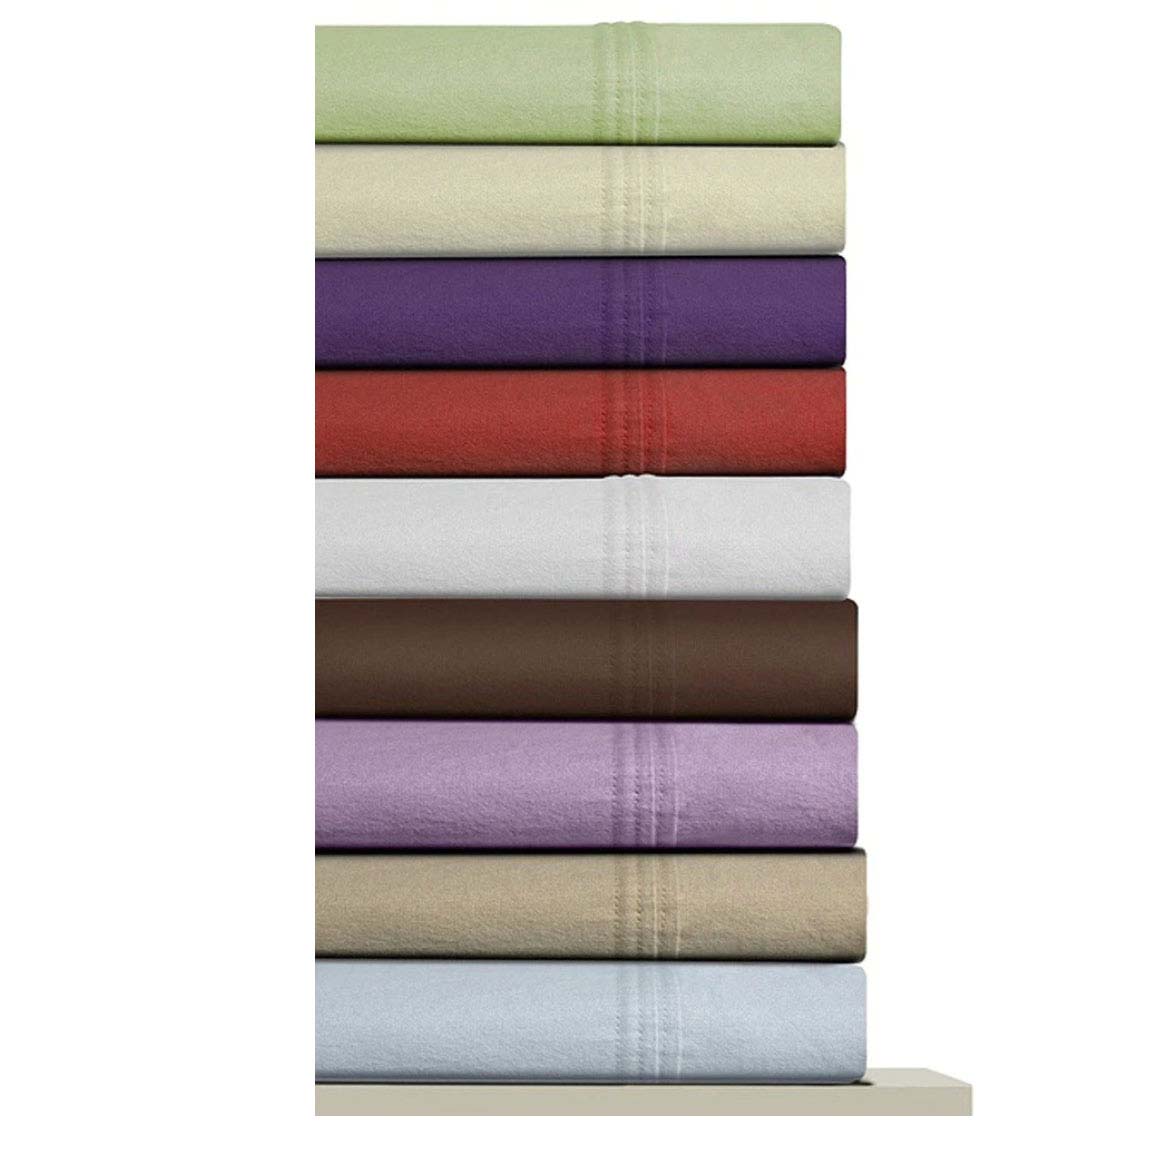 Colourful folded sheets stacked on each other